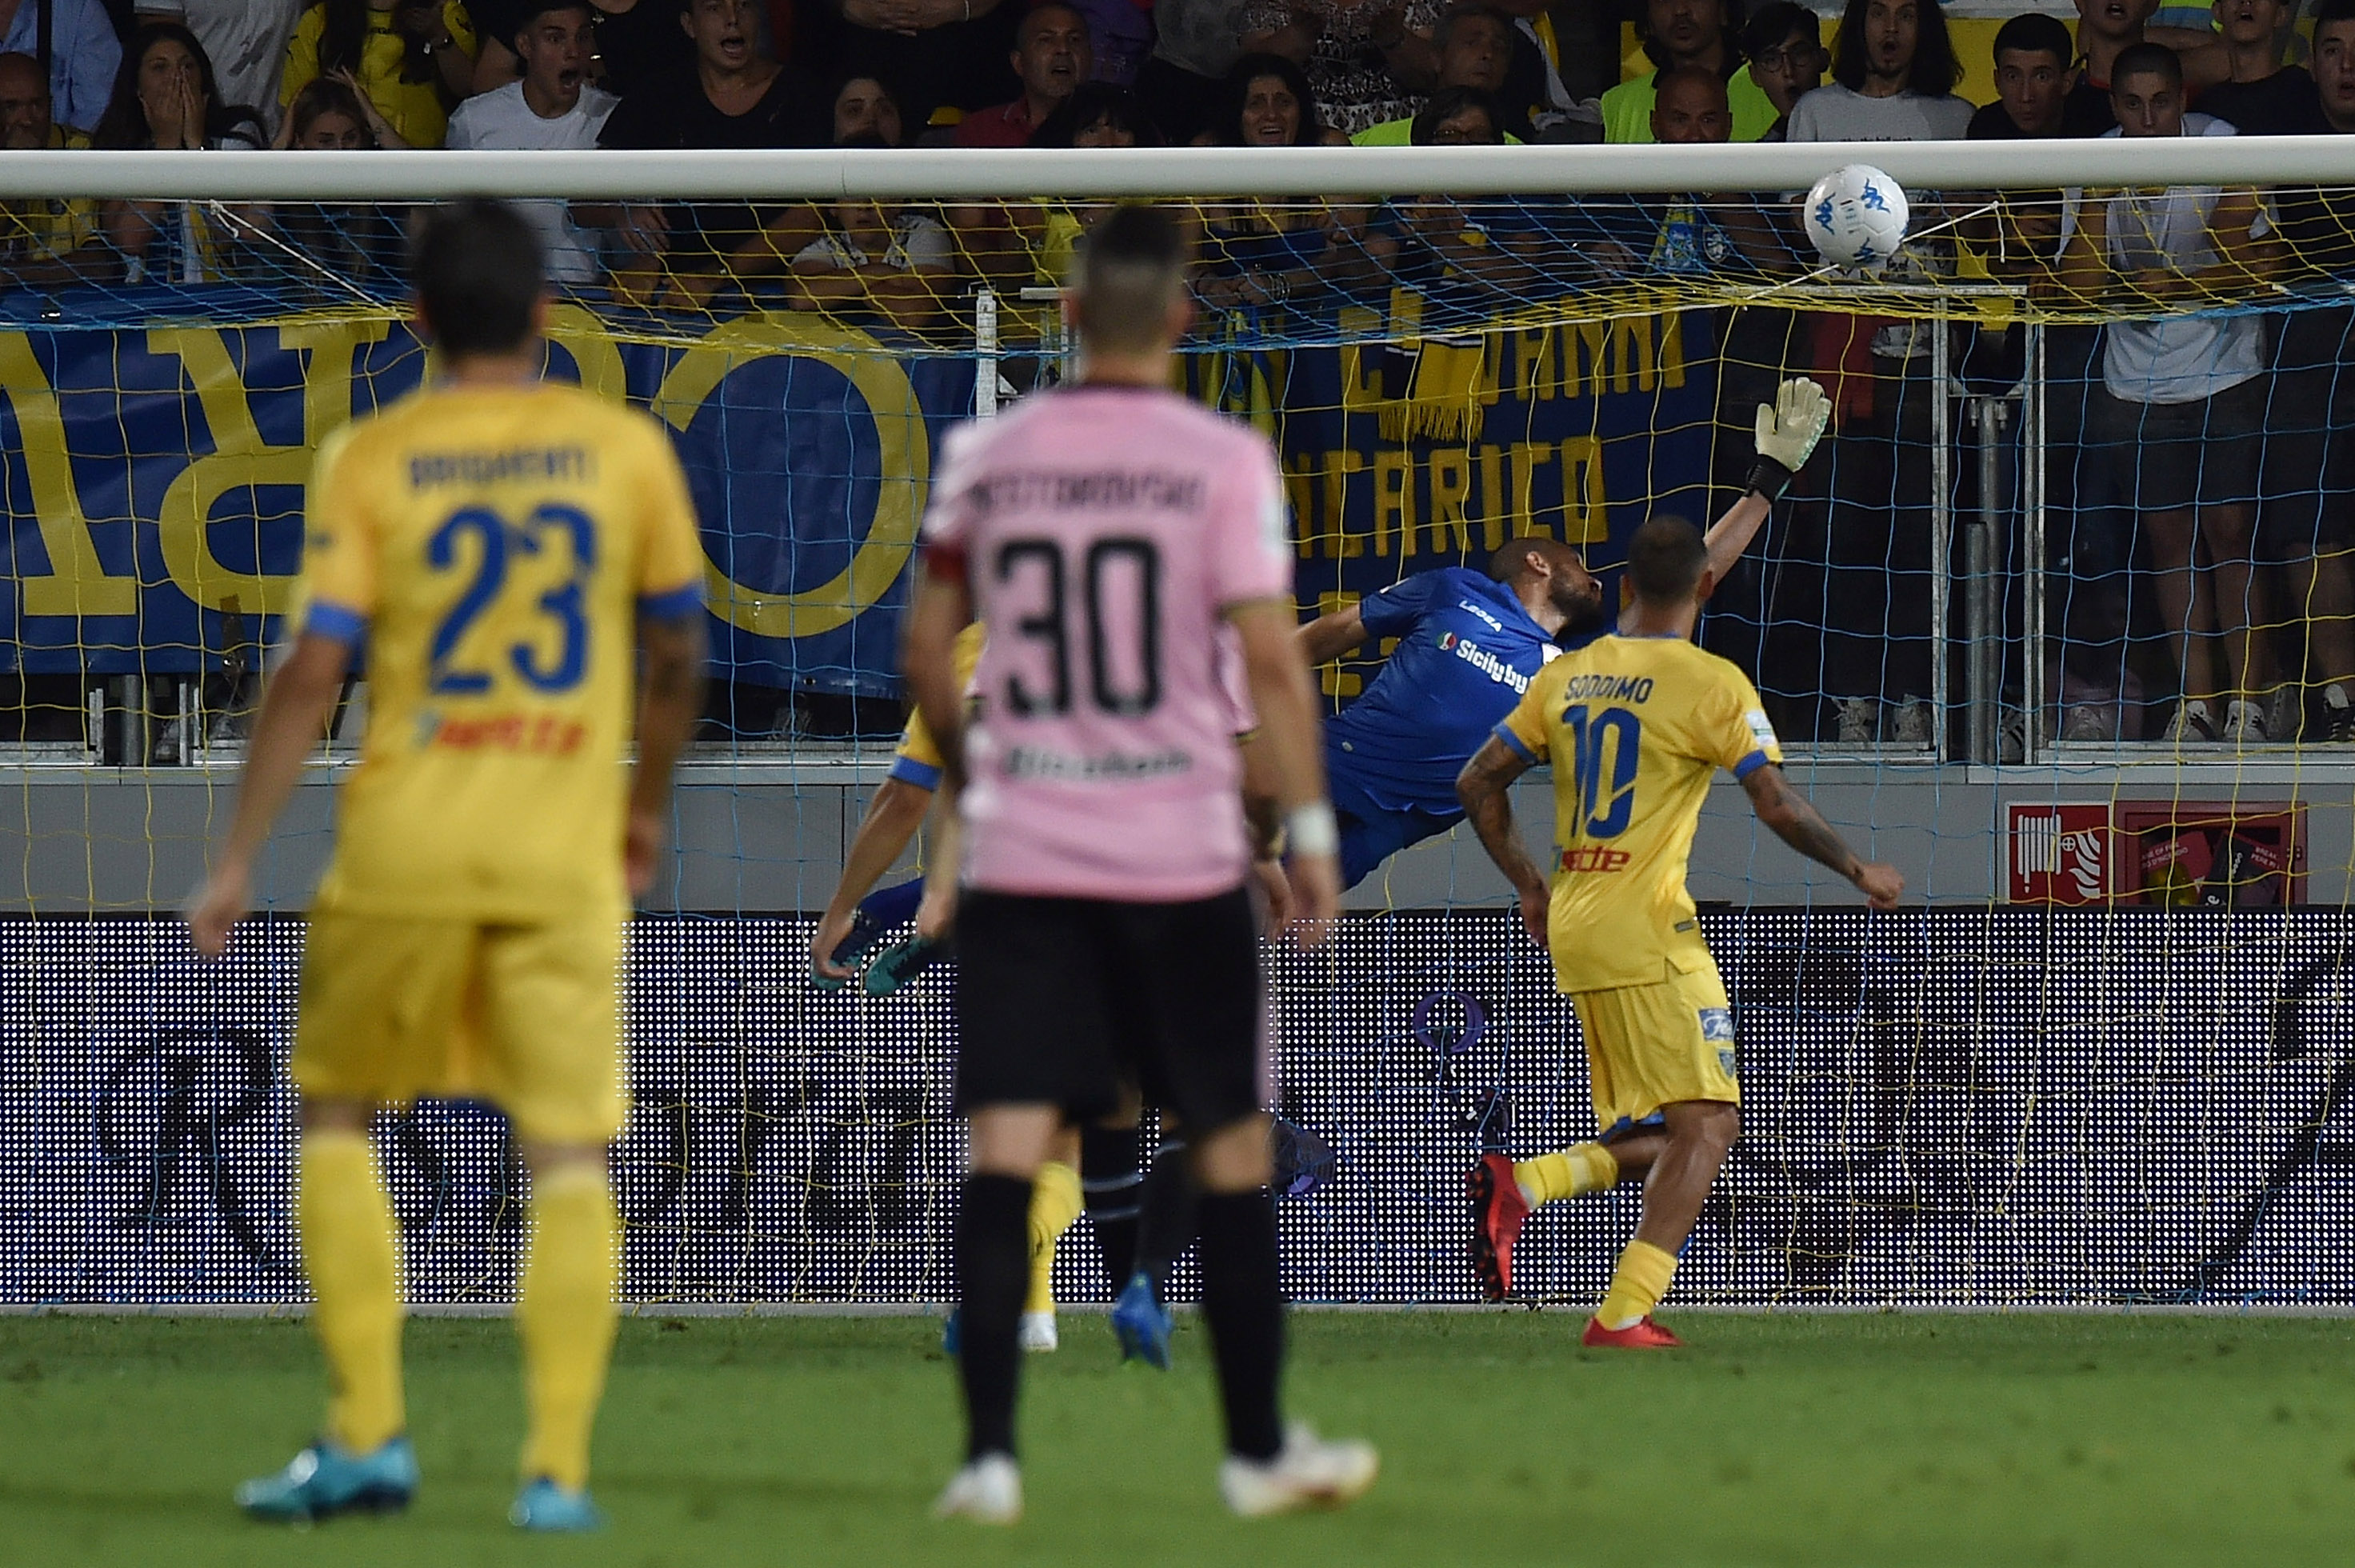 FROSINONE, ITALY - JUNE 16:  Raffaele Maiello (not pictured) of Frosinone scores the opening goal during the serie B playoff match final between Frosinone Calcio v US Citta di Palermo at Stadio Benito Stirpe on June 16, 2018 in Frosinone, Italy.  (Photo by Tullio M. Puglia/Getty Images)